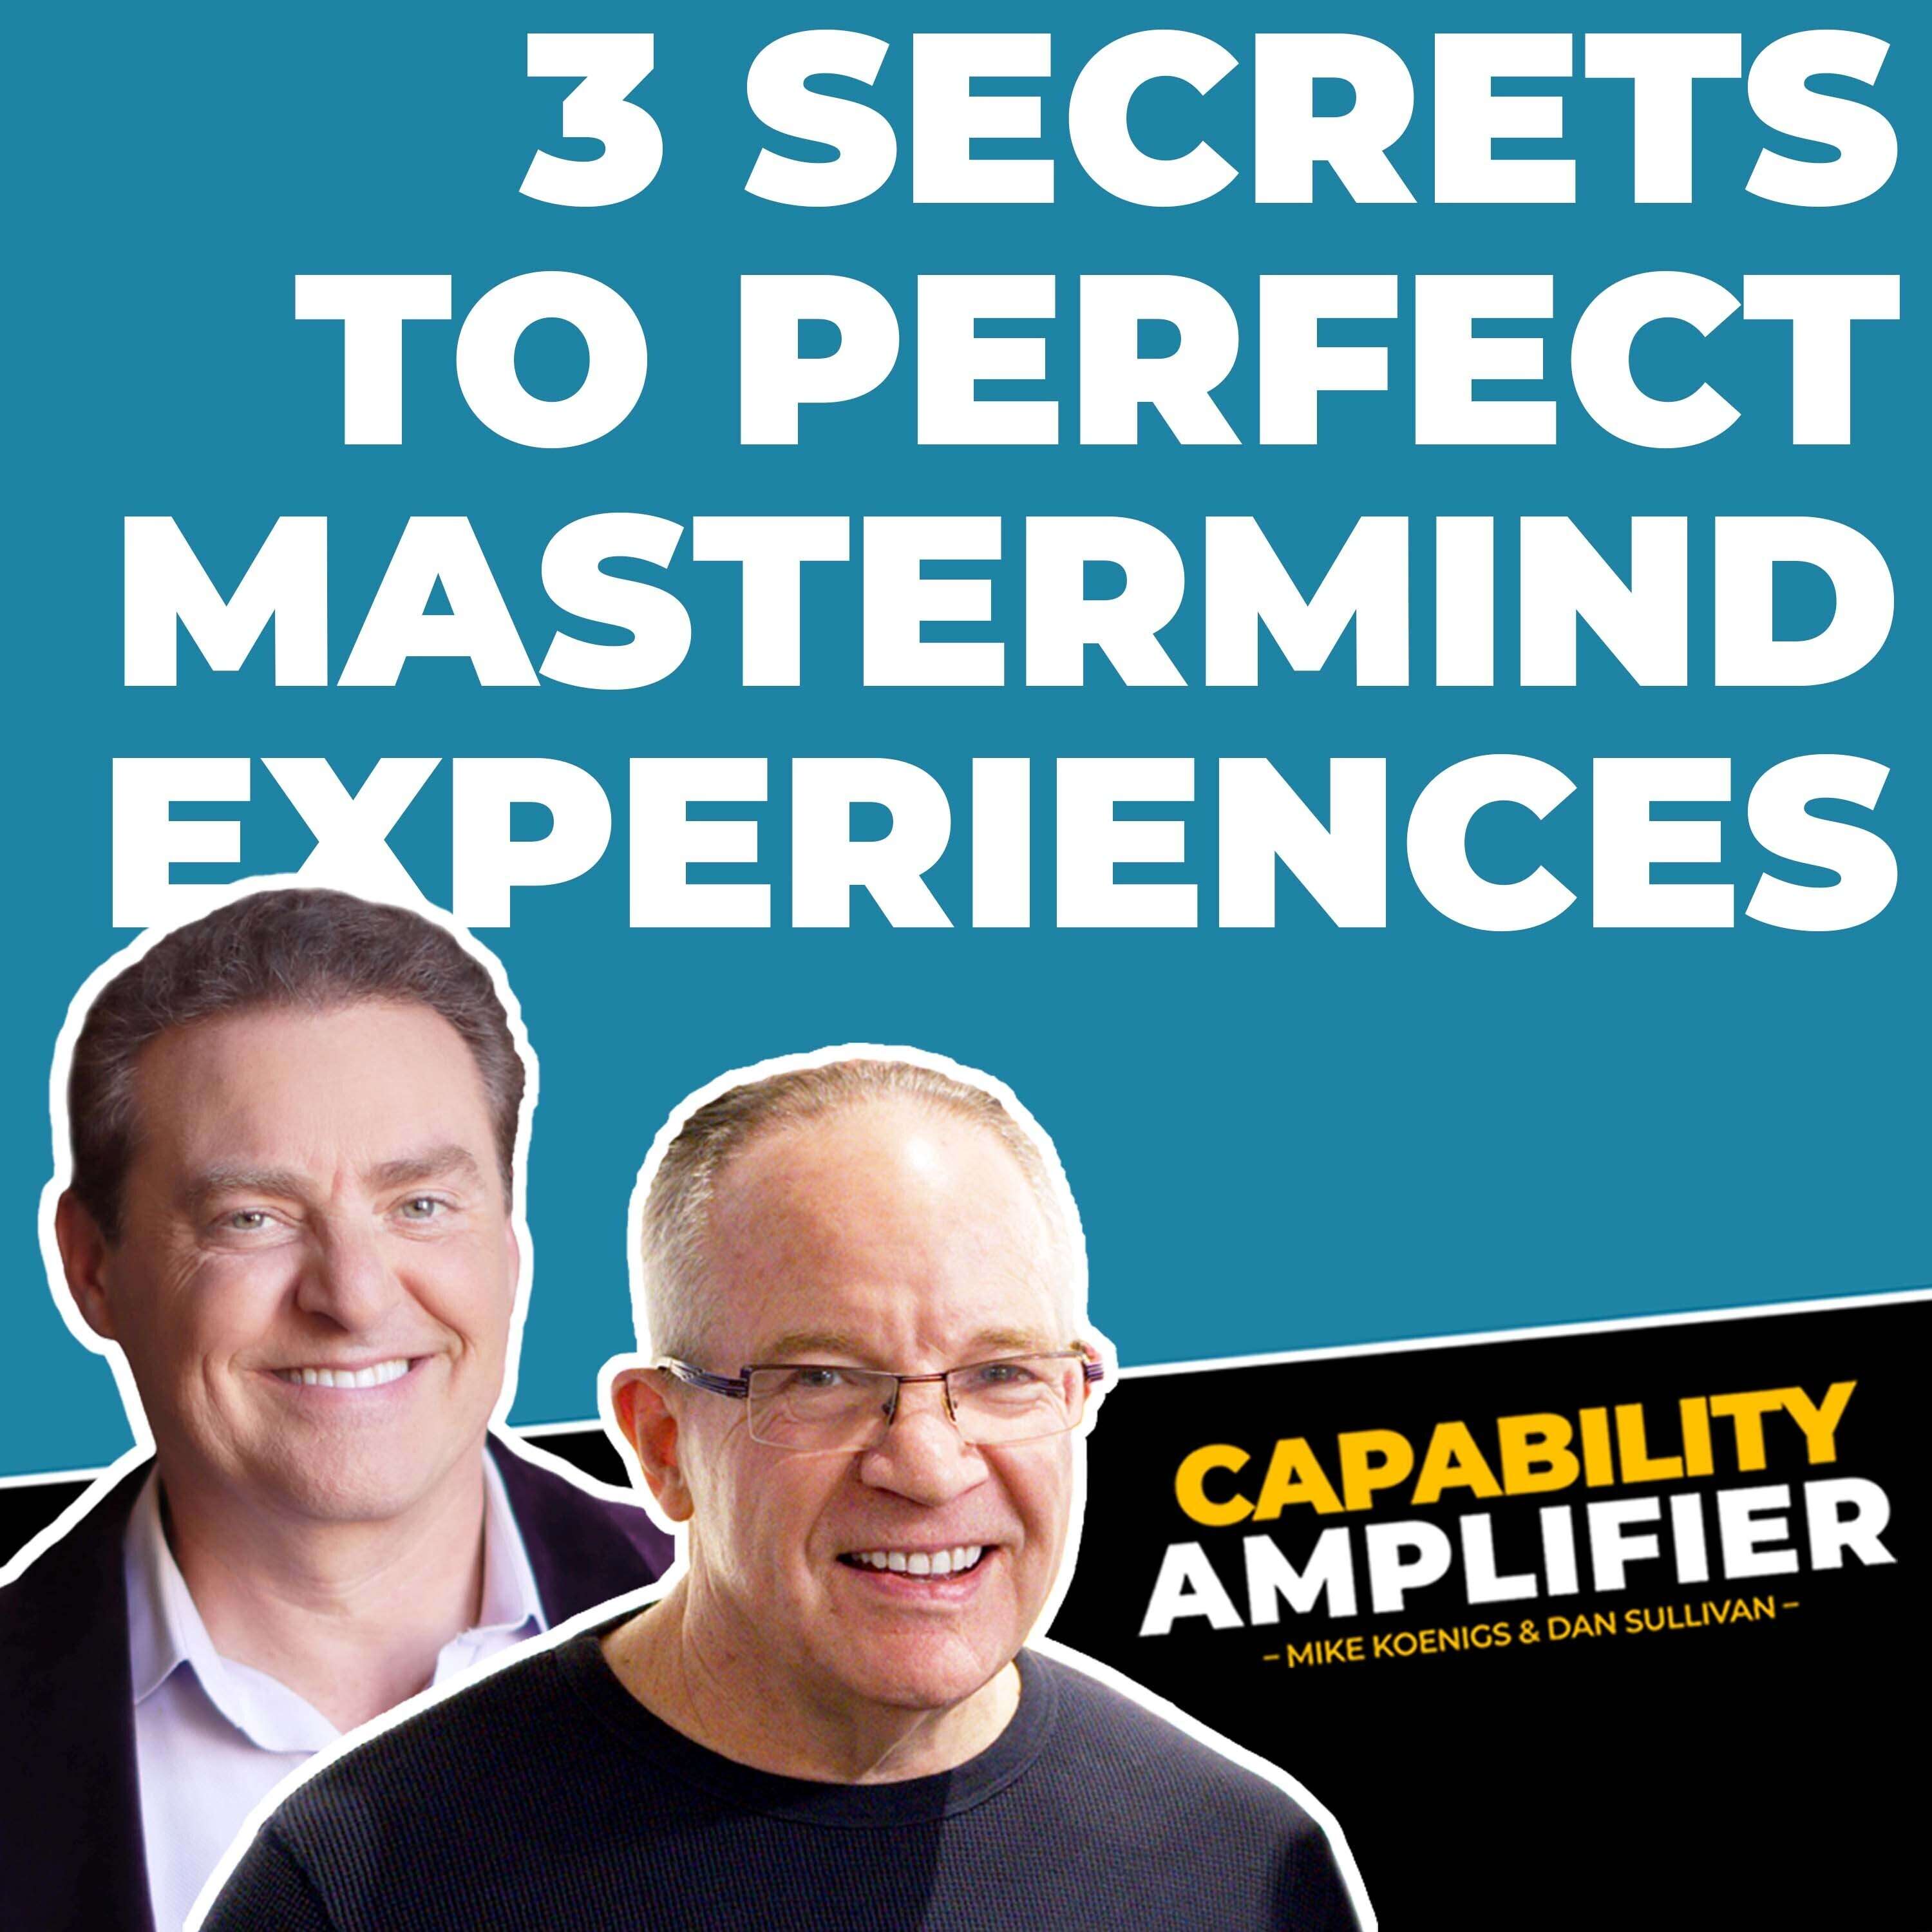 3 Secrets to Perfect Mastermind Experiences